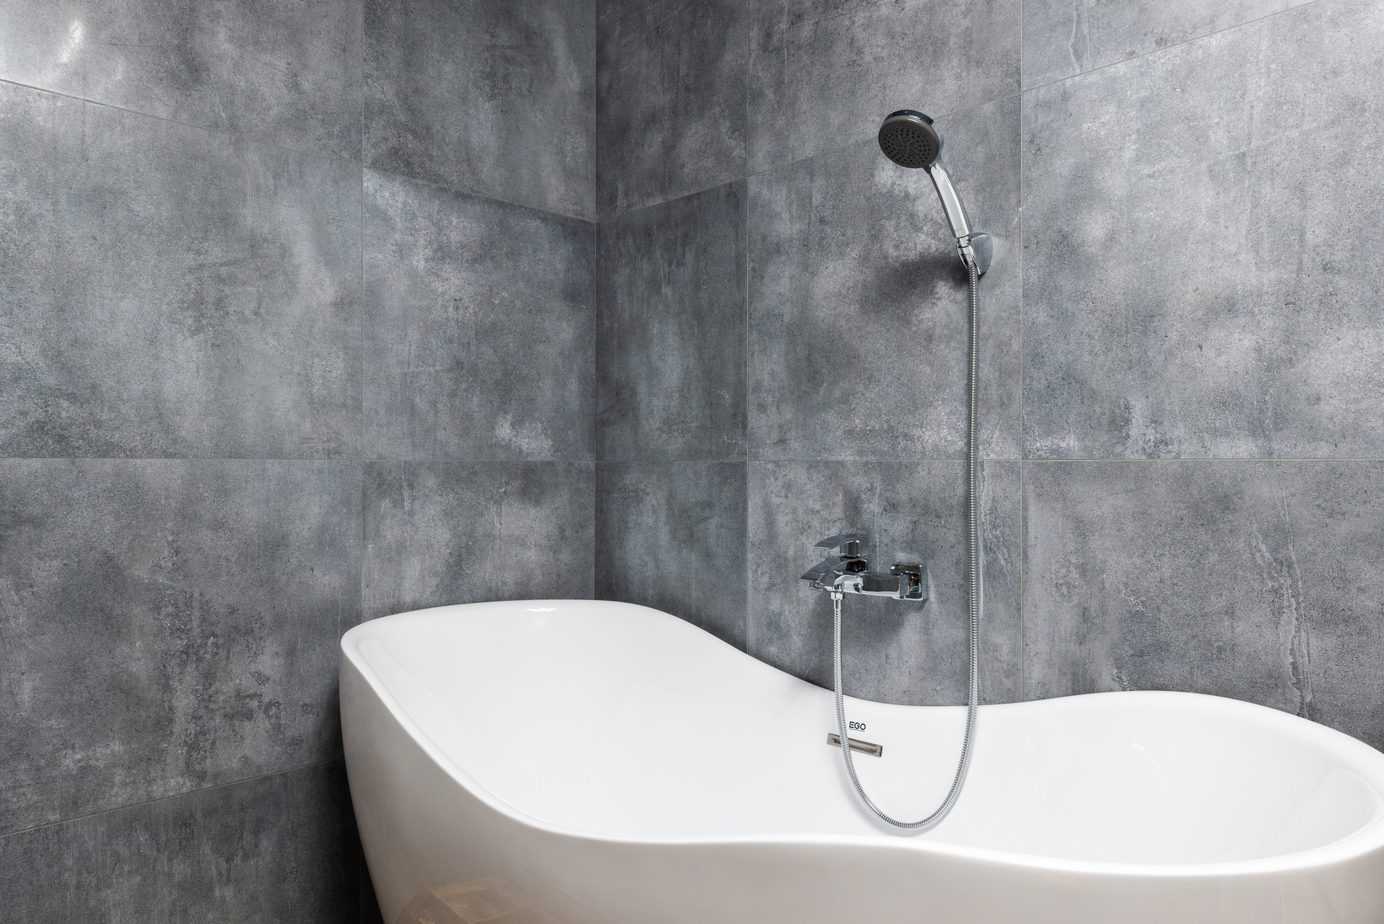 What should influence your choice of bathtub?